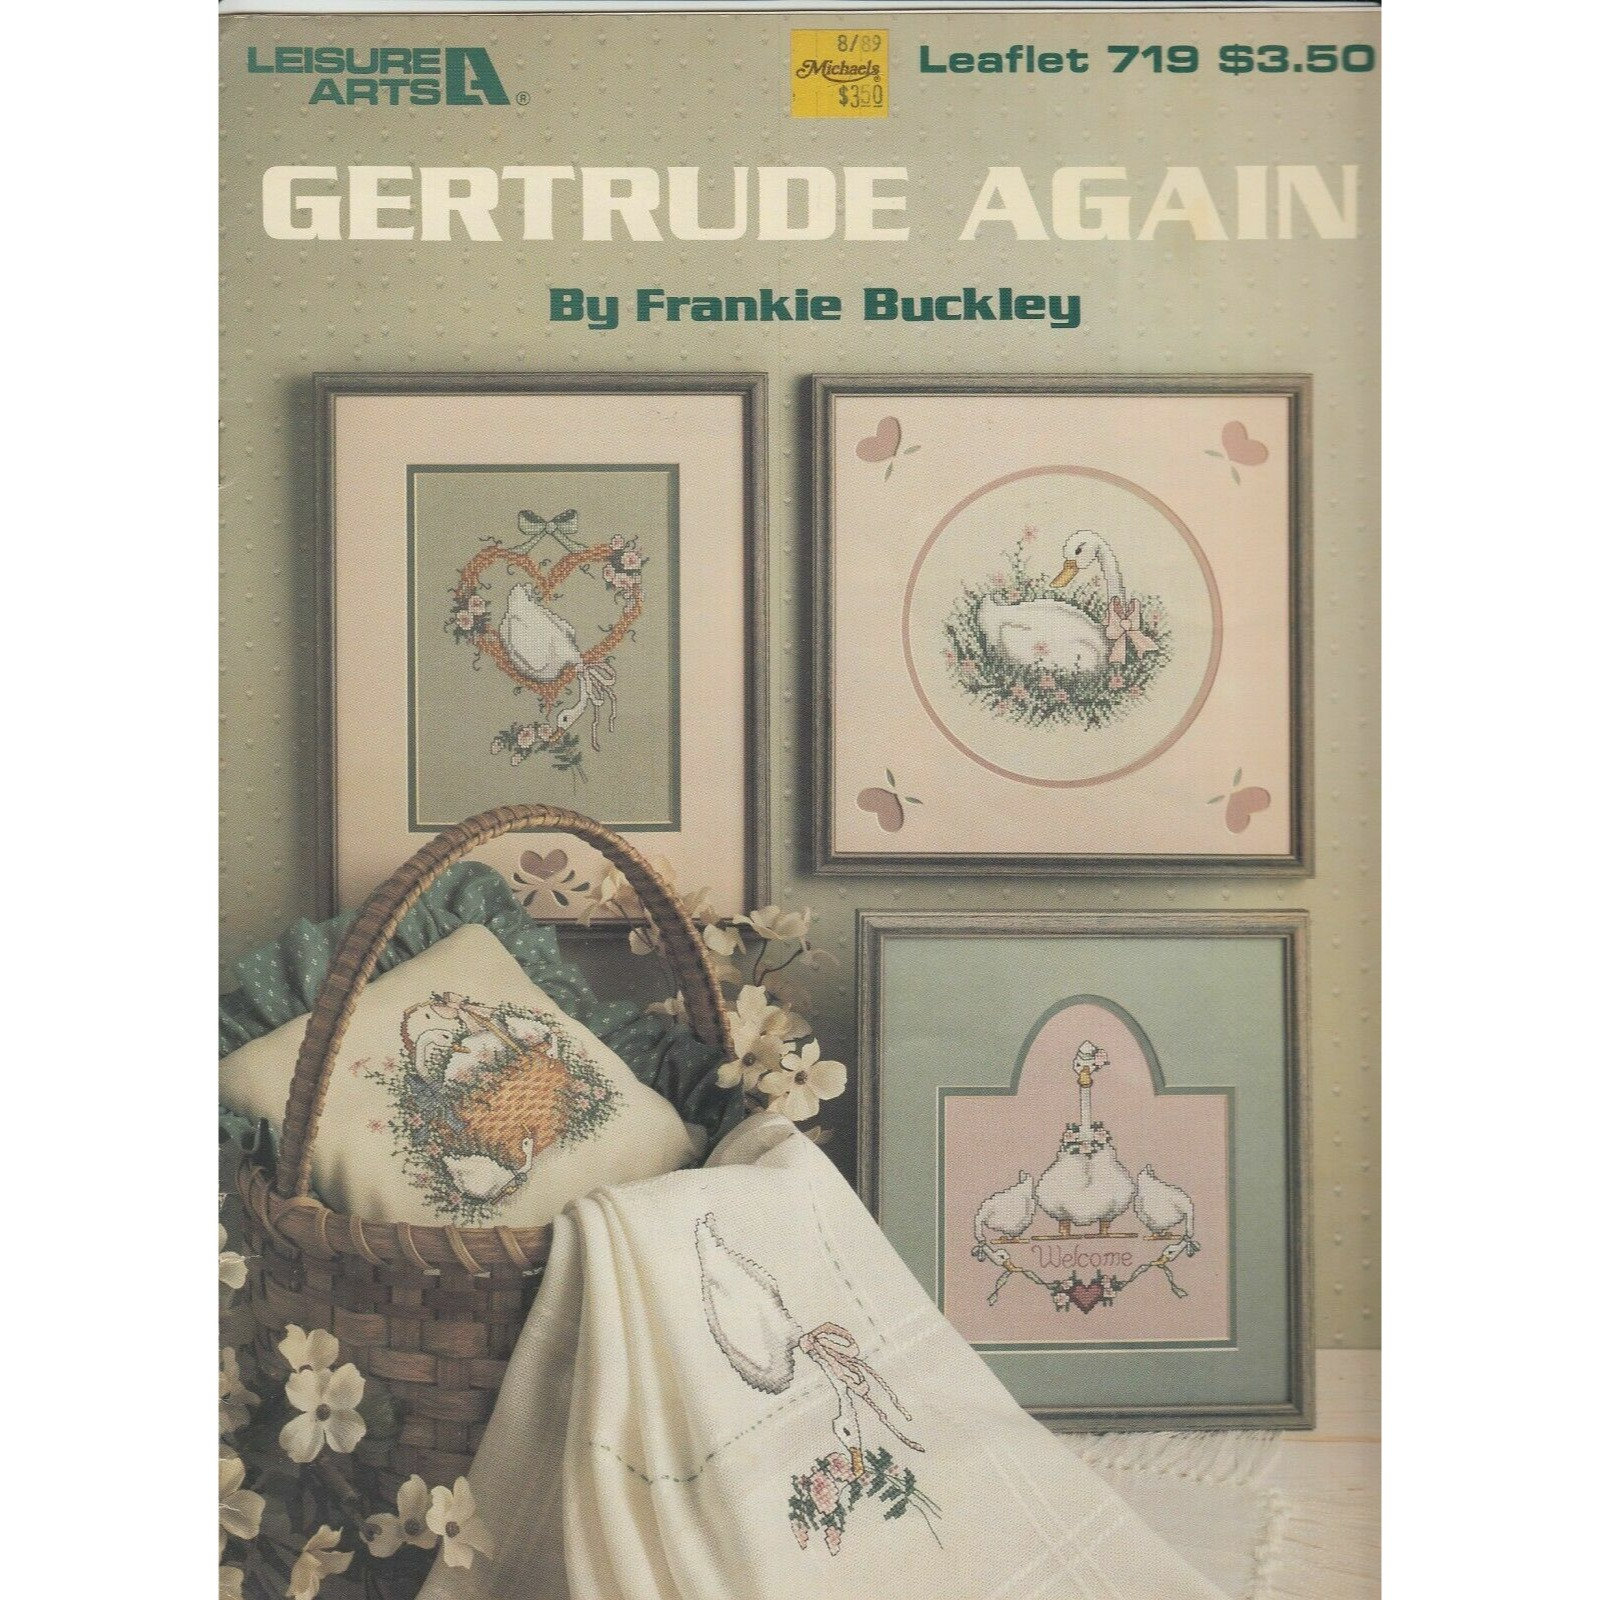 Gertrude & Friends and Gertrude Again Counted Cross Stitch Pattern Books 